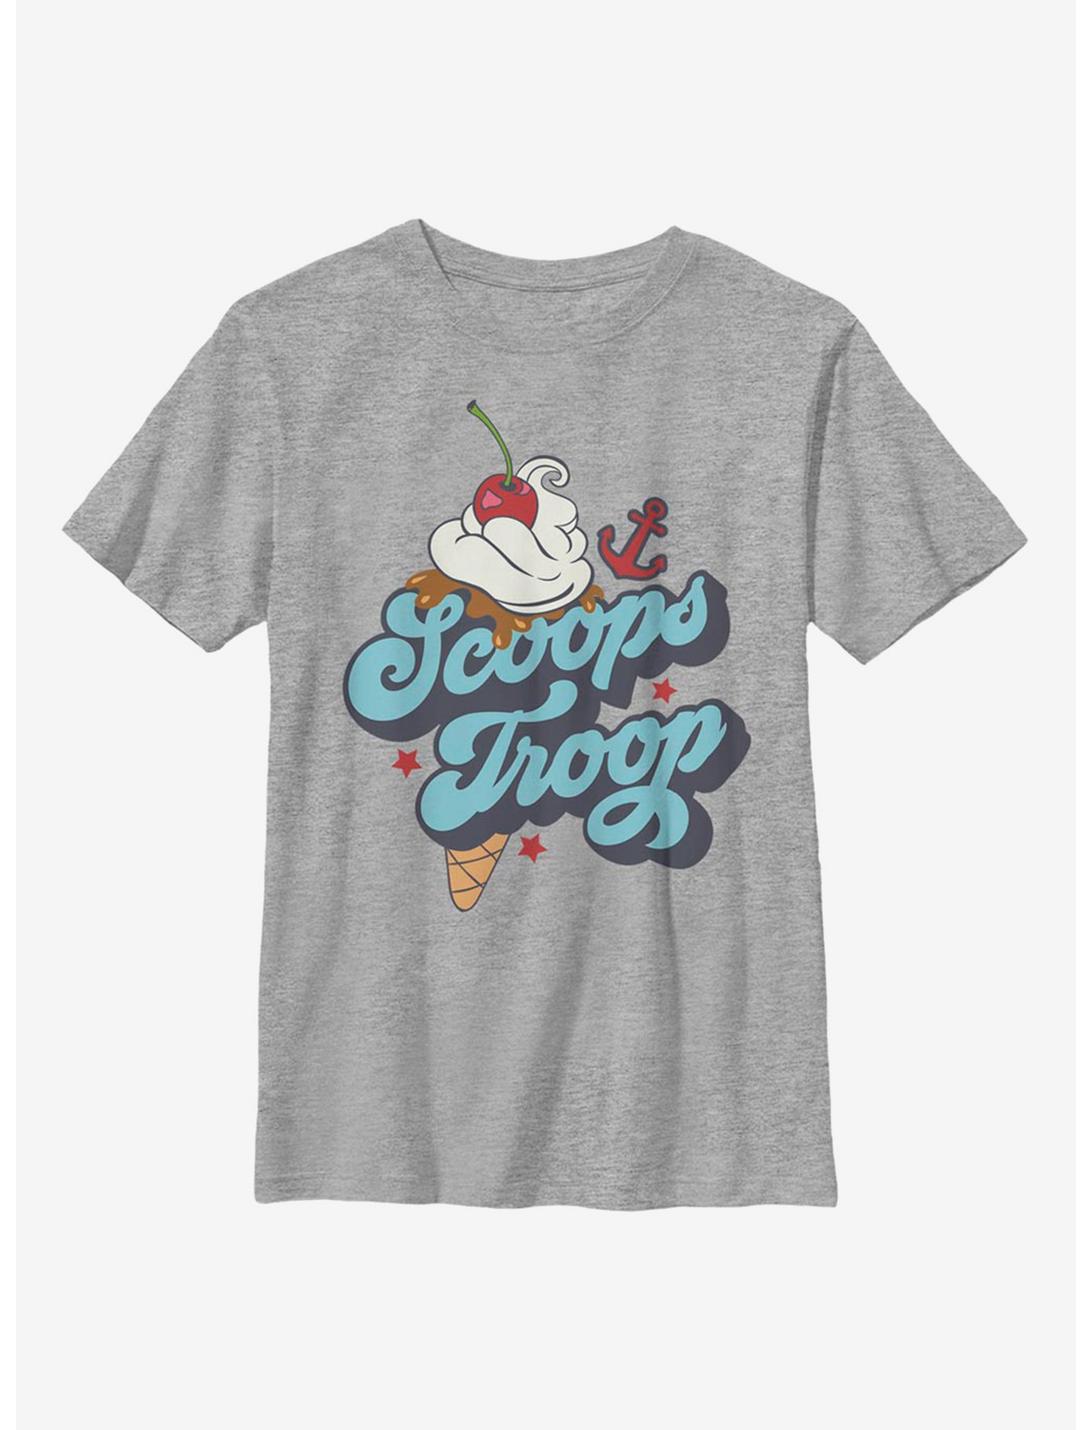 Stranger Things Scoops Troops Youth T-Shirt, ATH HTR, hi-res